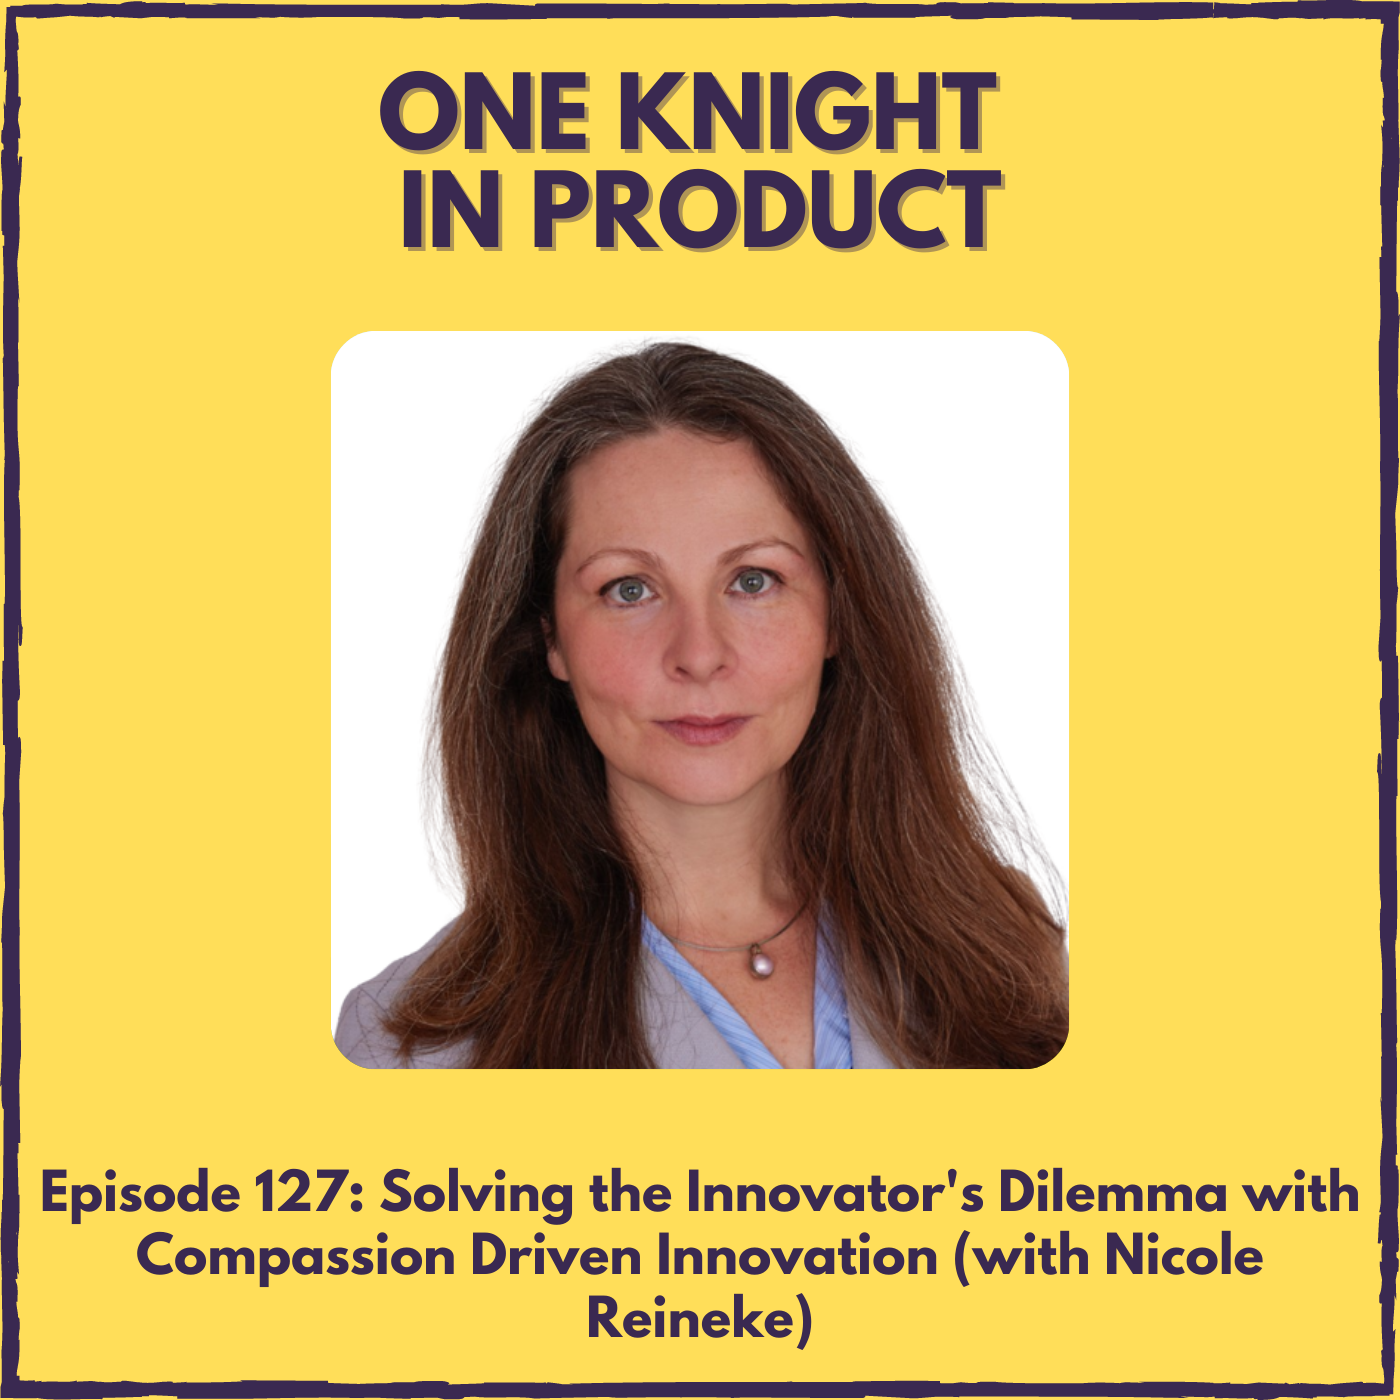 Solving the Innovator’s Dilemma with Compassion Driven Innovation (with Nicole Reineke, VP Innovation @ Iron Mountain & Co-Author ”Compassion Driven Innovation”)